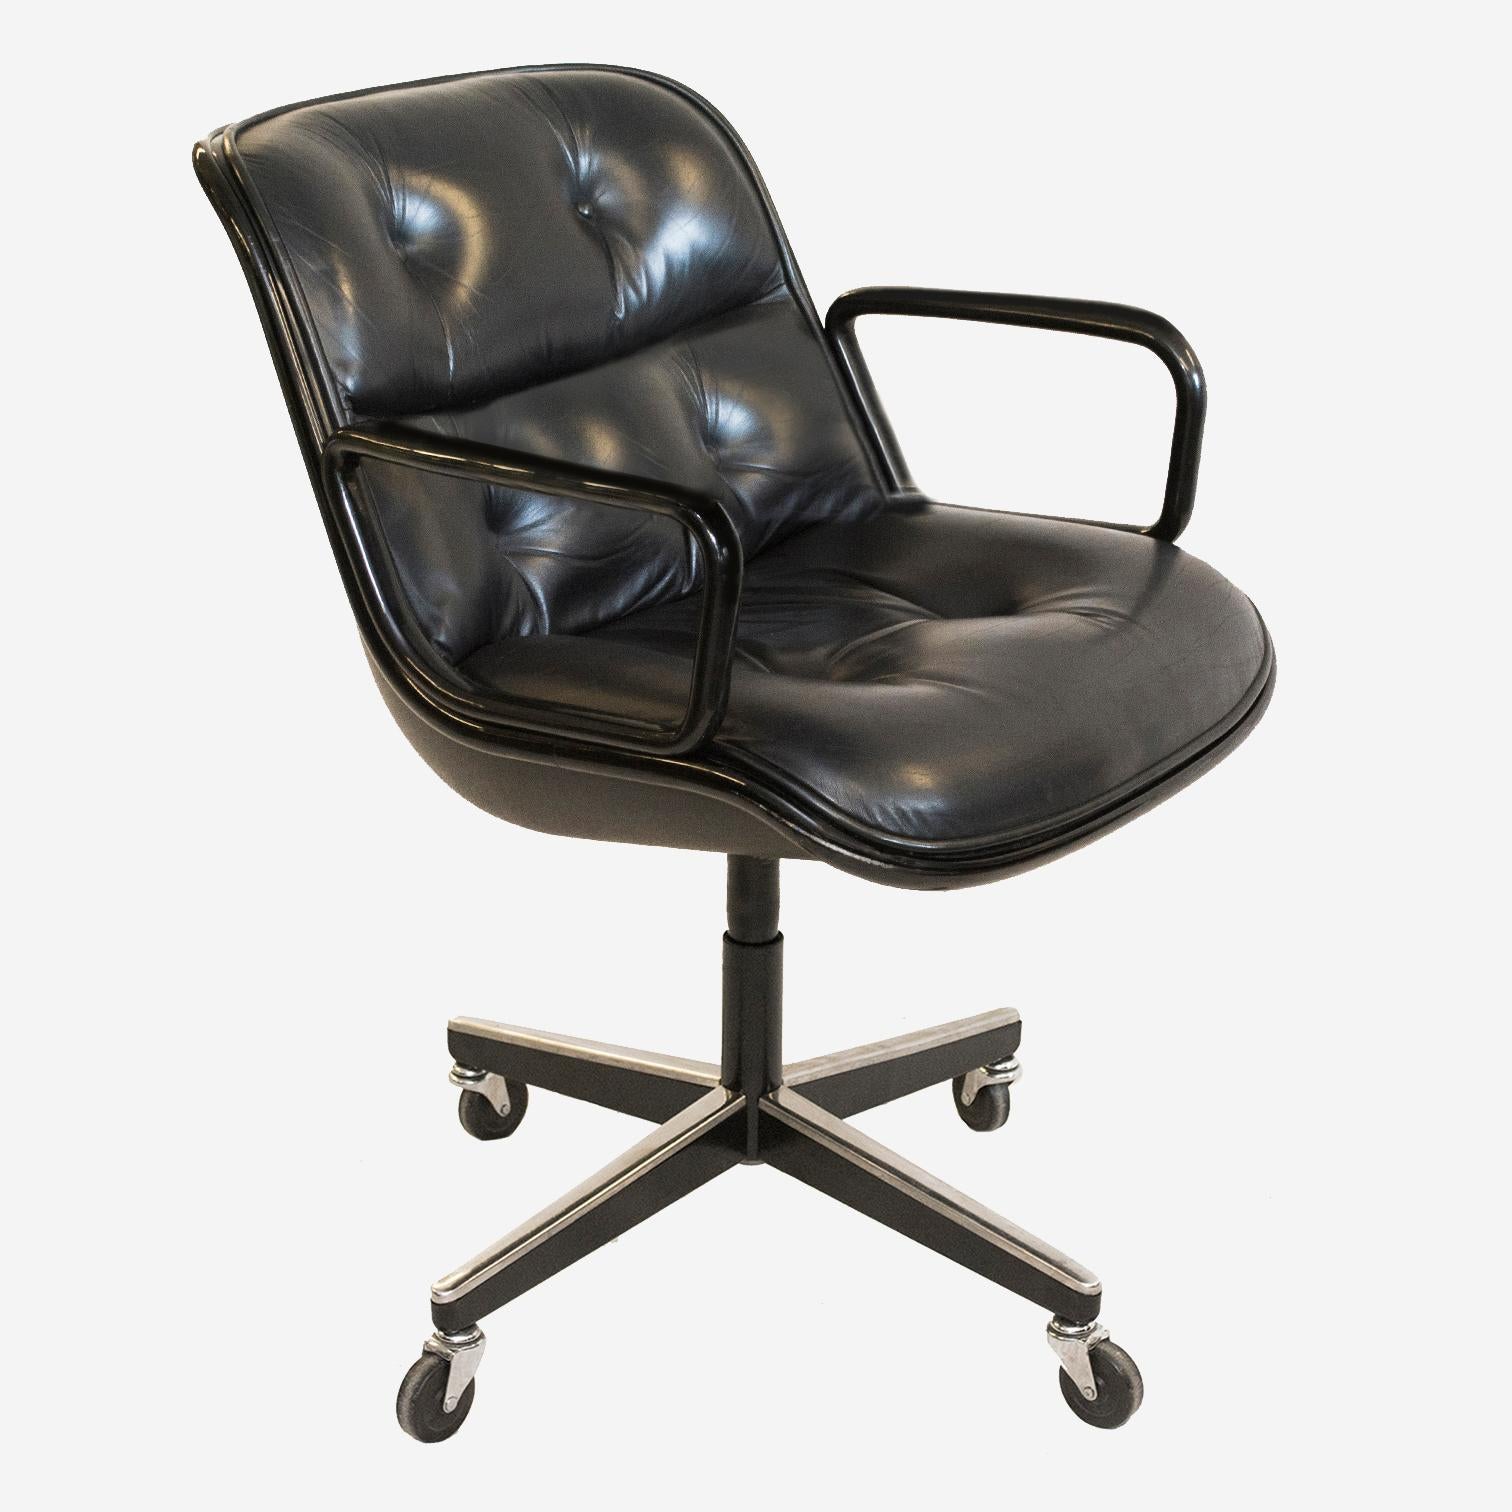 Offering the classic Pollock Executive Chair in its original black leather, black steel frame, and vintage 4-star base, in very good condition.

Charles Pollock was a master of design who's work was supported by Florence Knoll and her company,